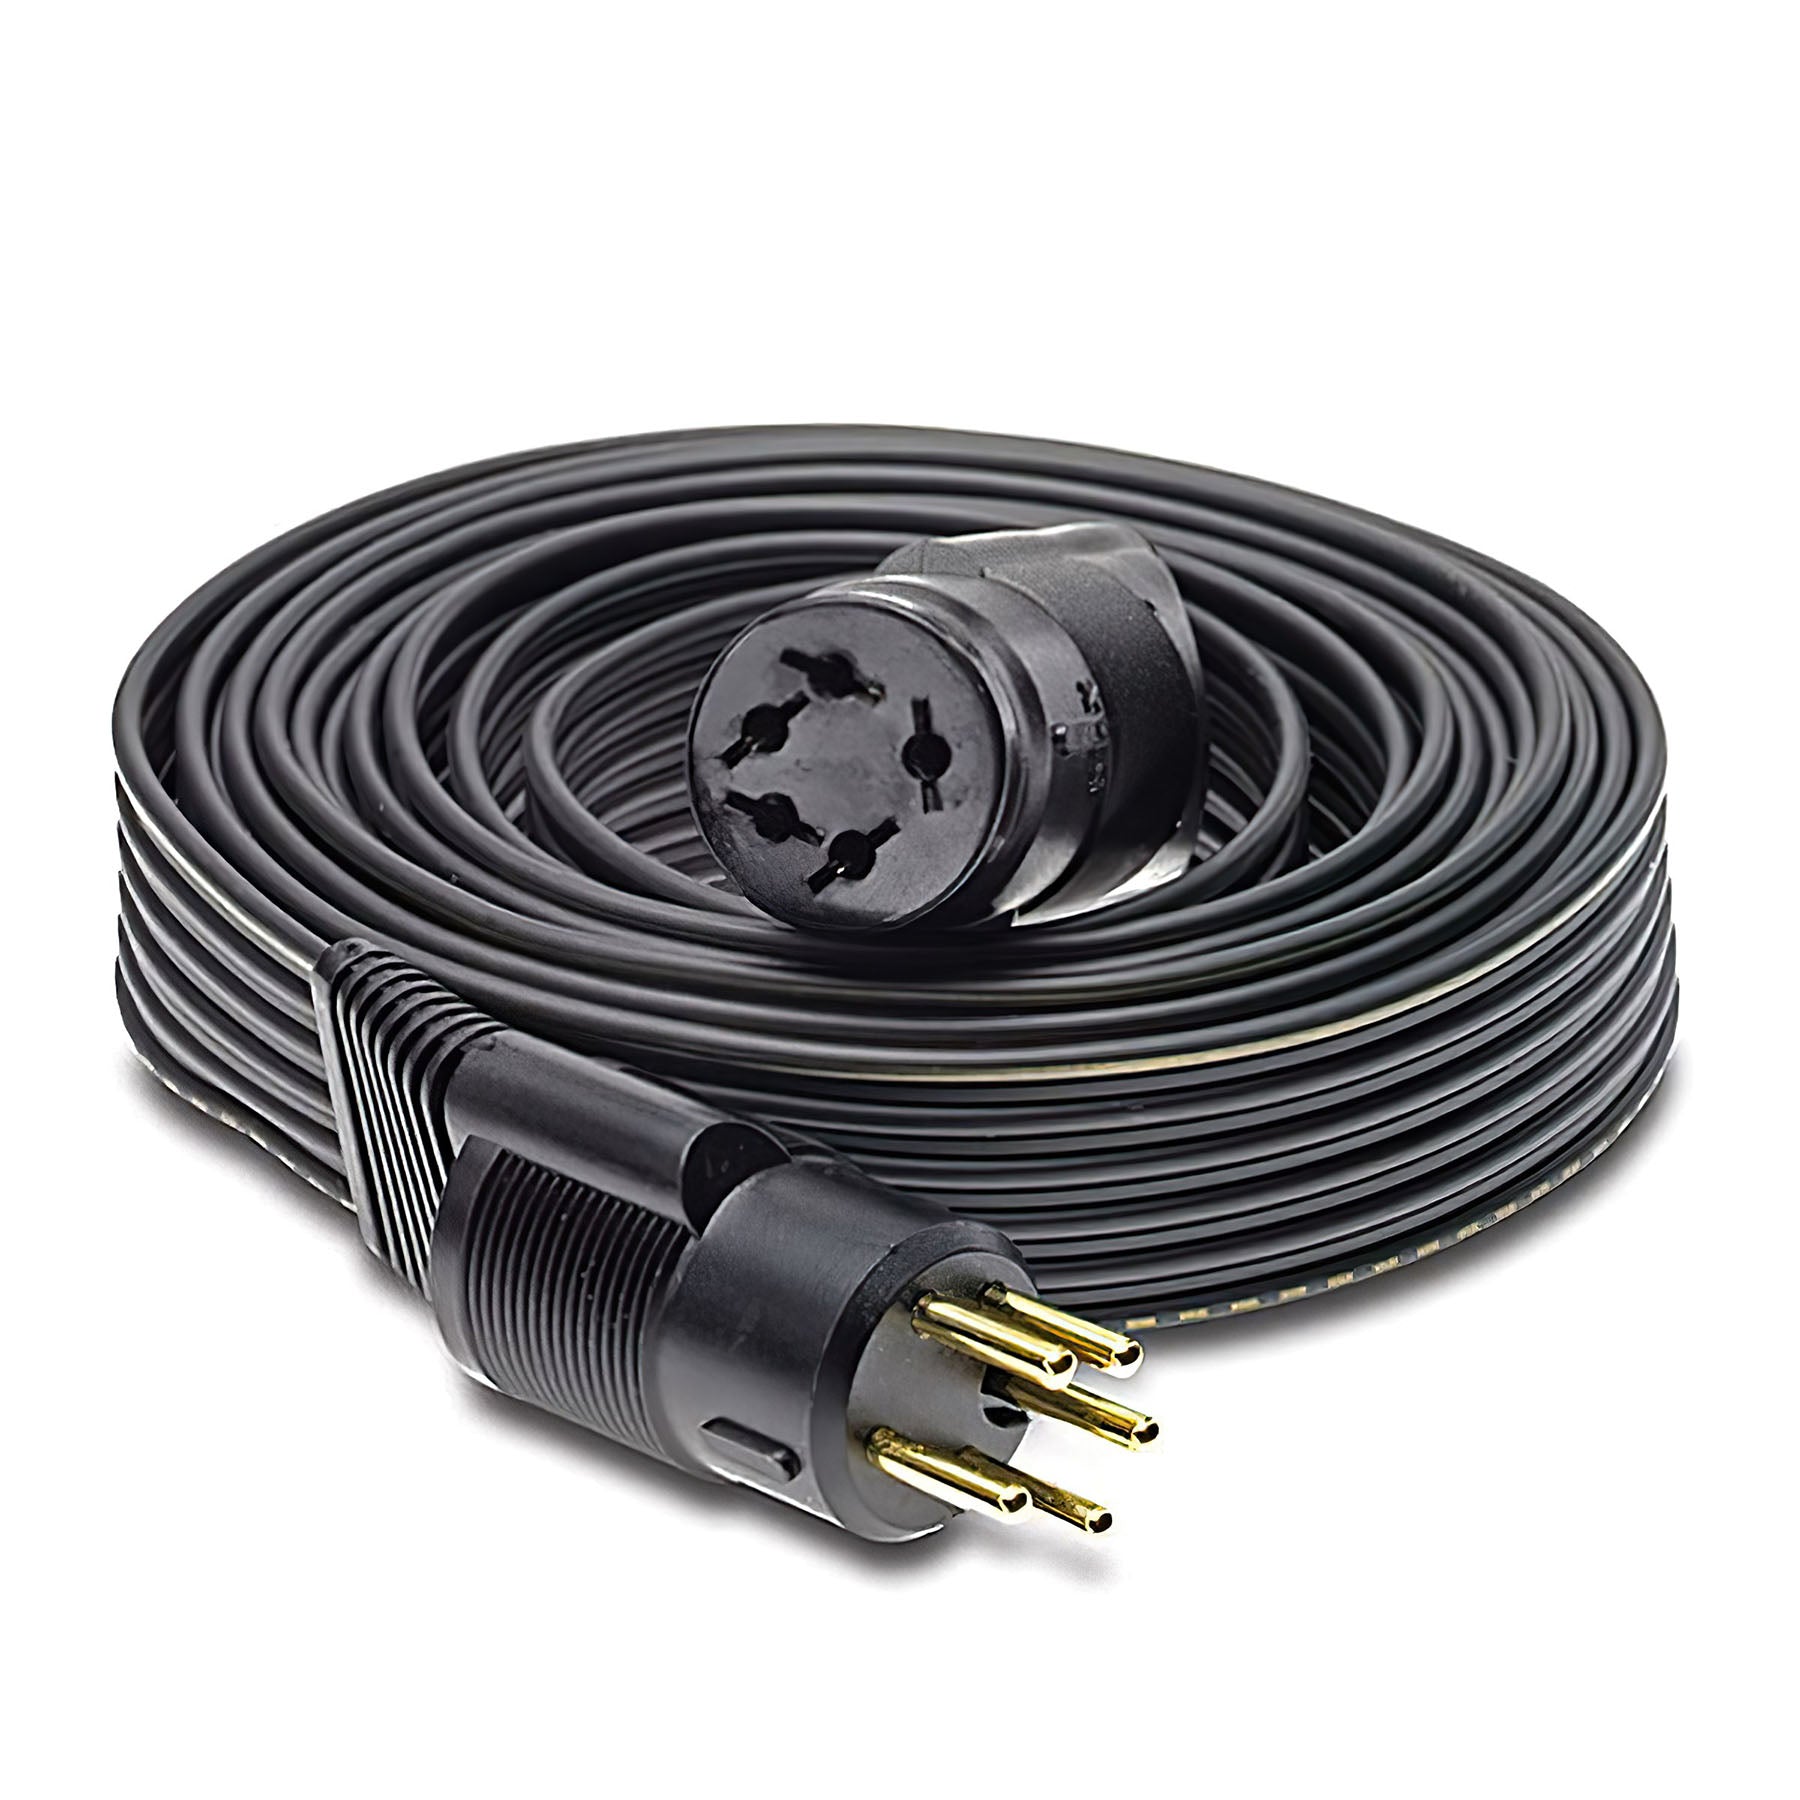 STAX SRE-750H PC-OCC 5m Extension Cable for STAX Headphones